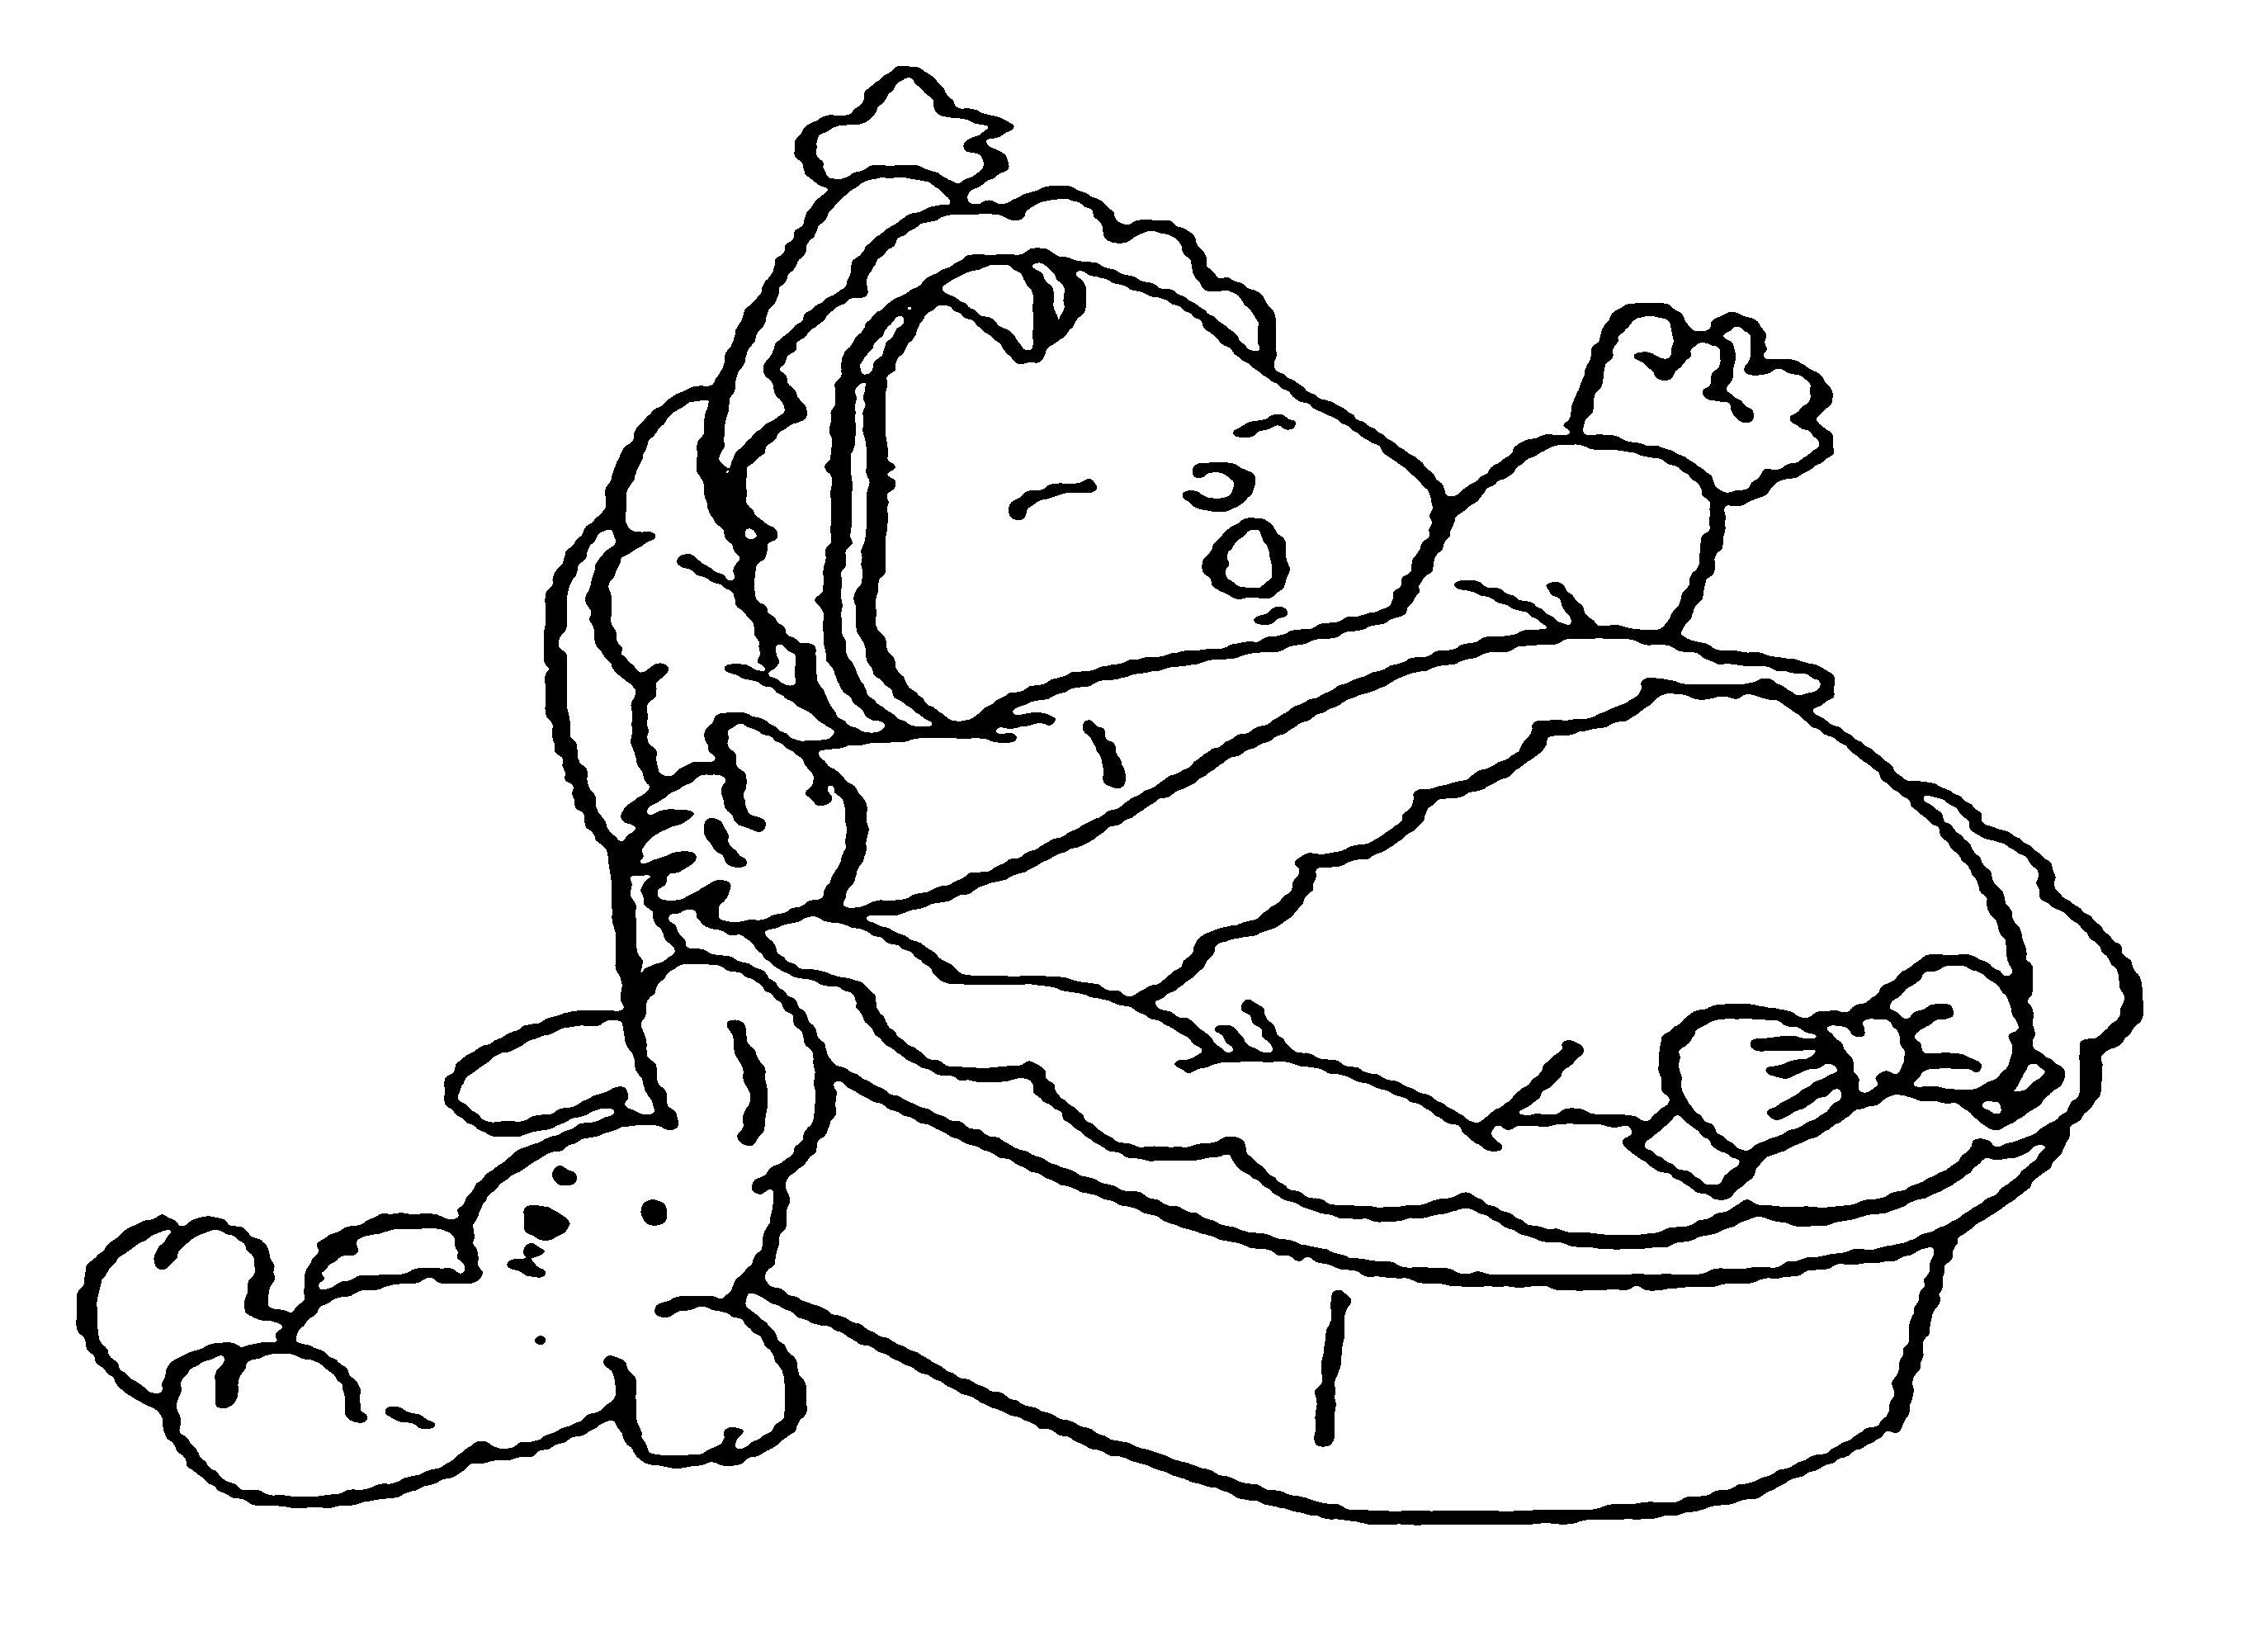 Baby Coloring Page